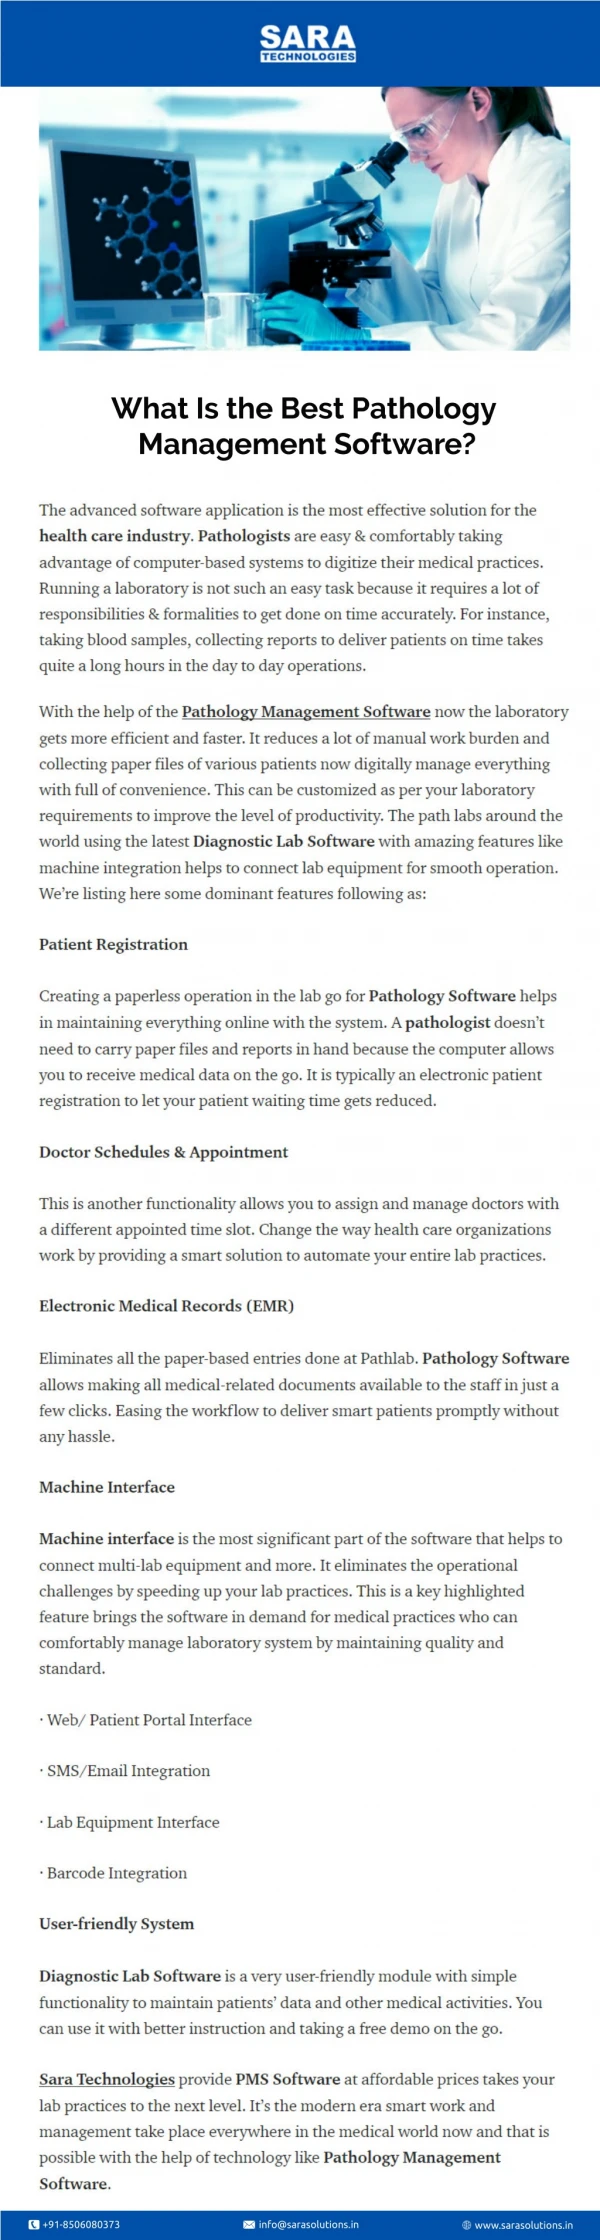 What Is the Best Pathology Management Software?